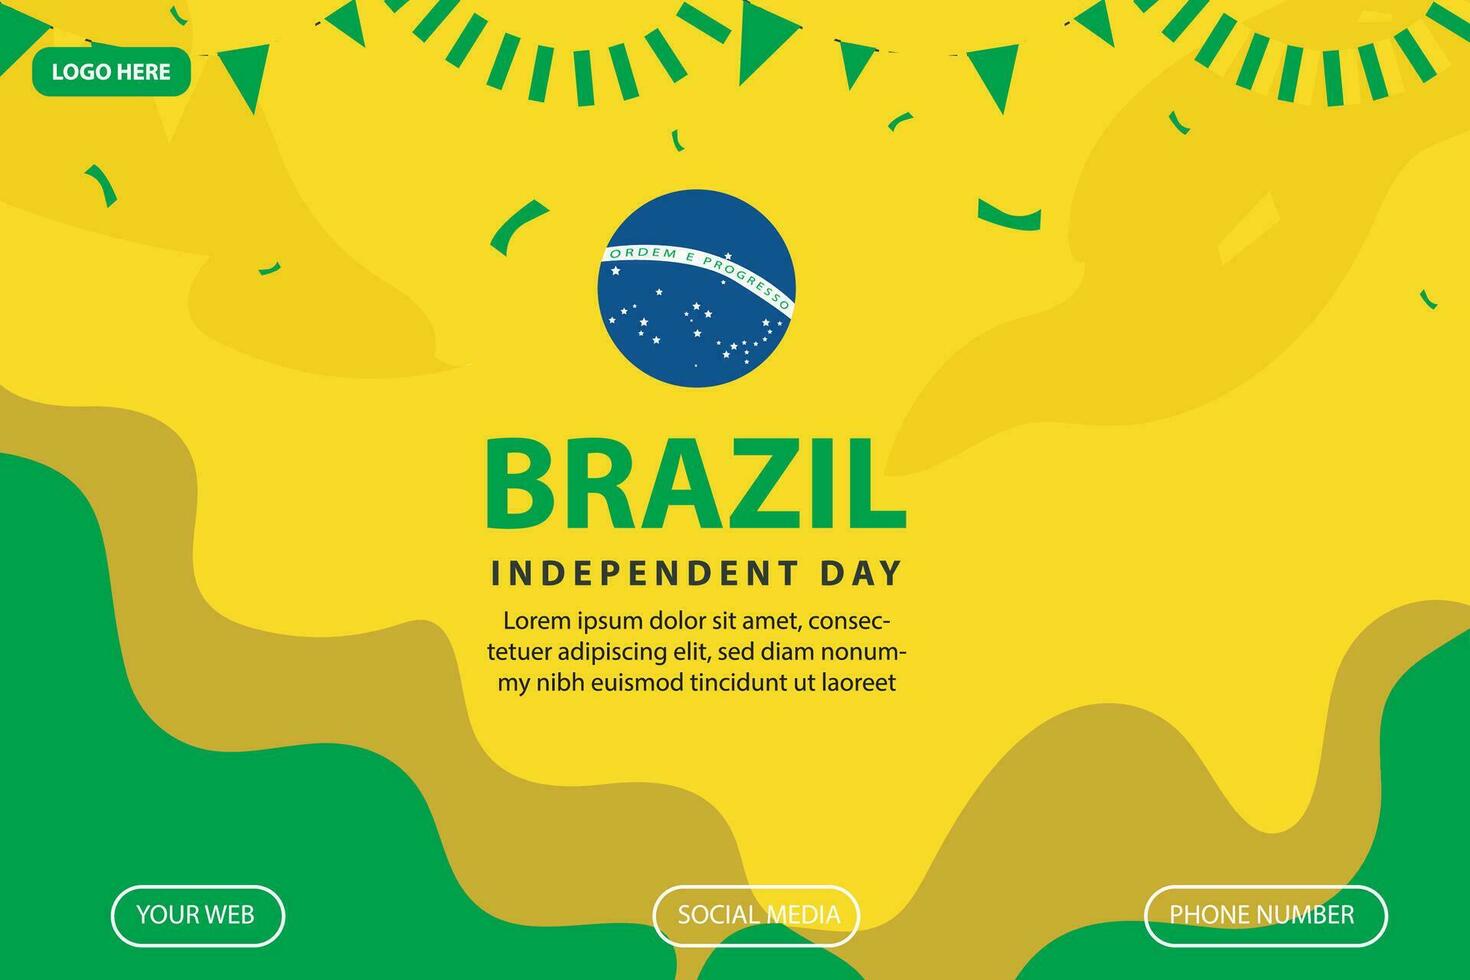 brazil independence day 7 September celebration vector template banner, social media post, flyer or greeting card with yellow green theme and flag. vector illustration